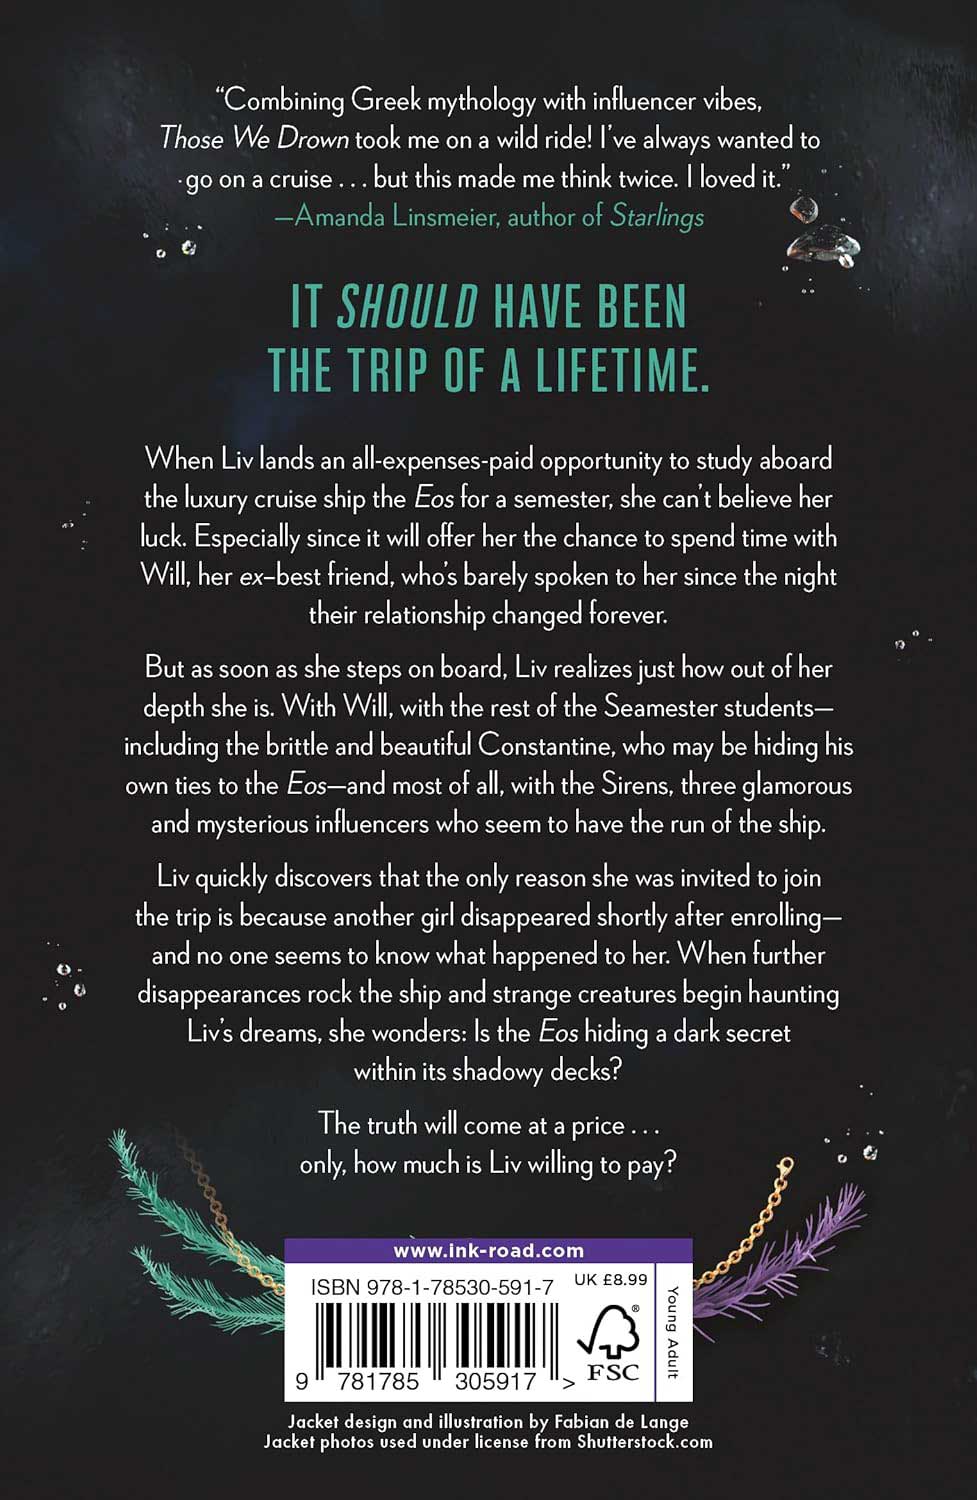 Those We Drown by Amy Goldsmith back cover